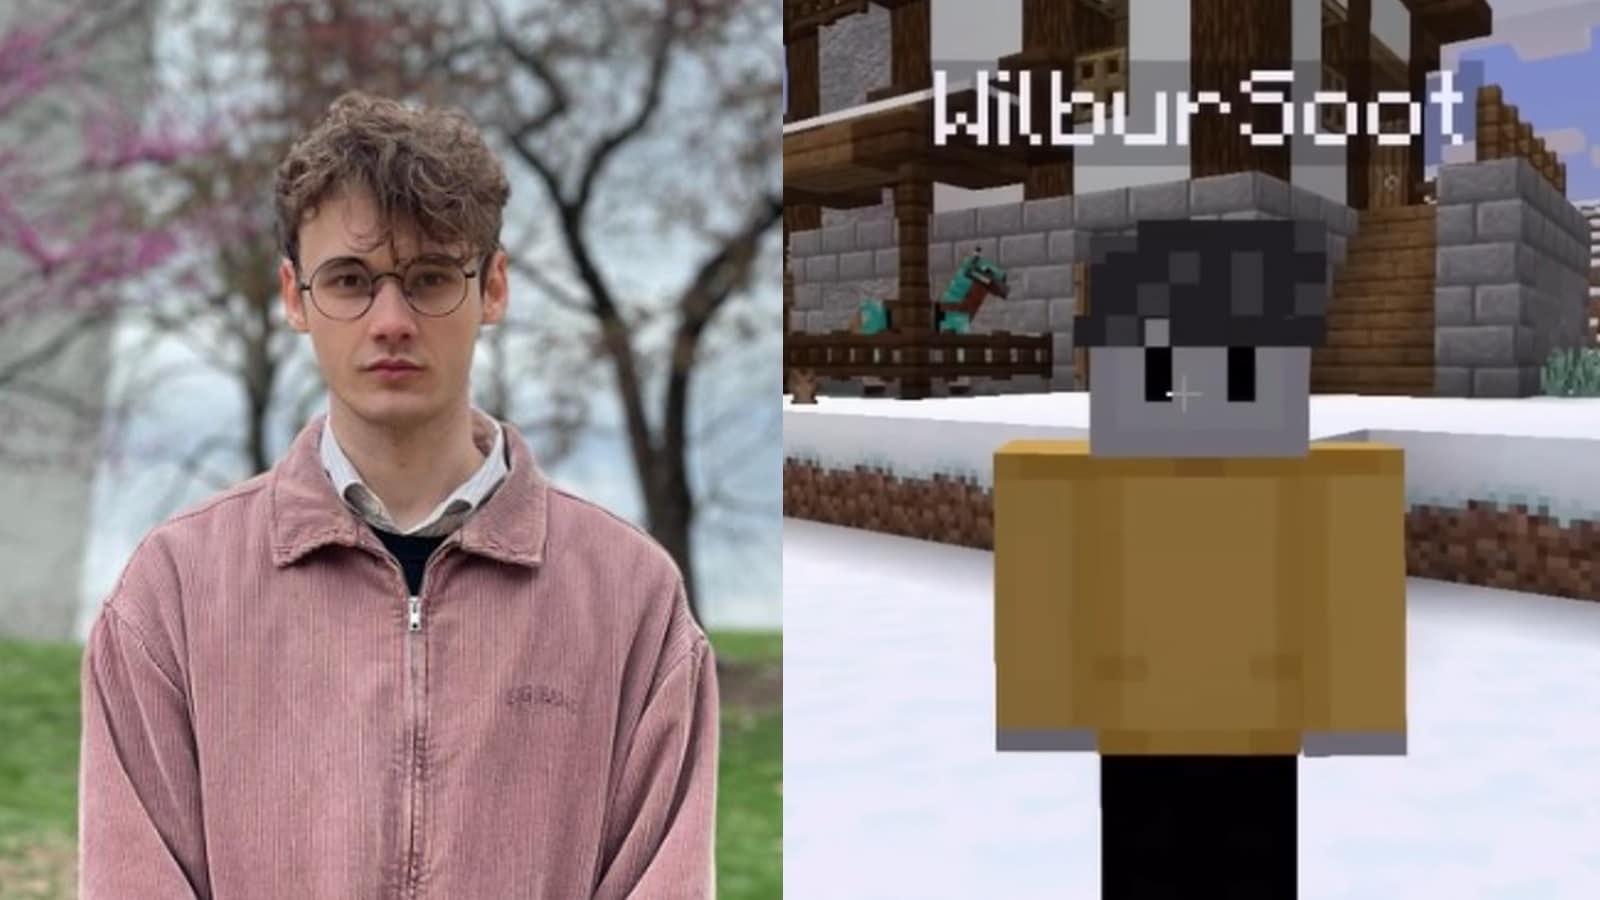 Twitch streamer WilburSoot and his Minecraft avatar in Dream SMP